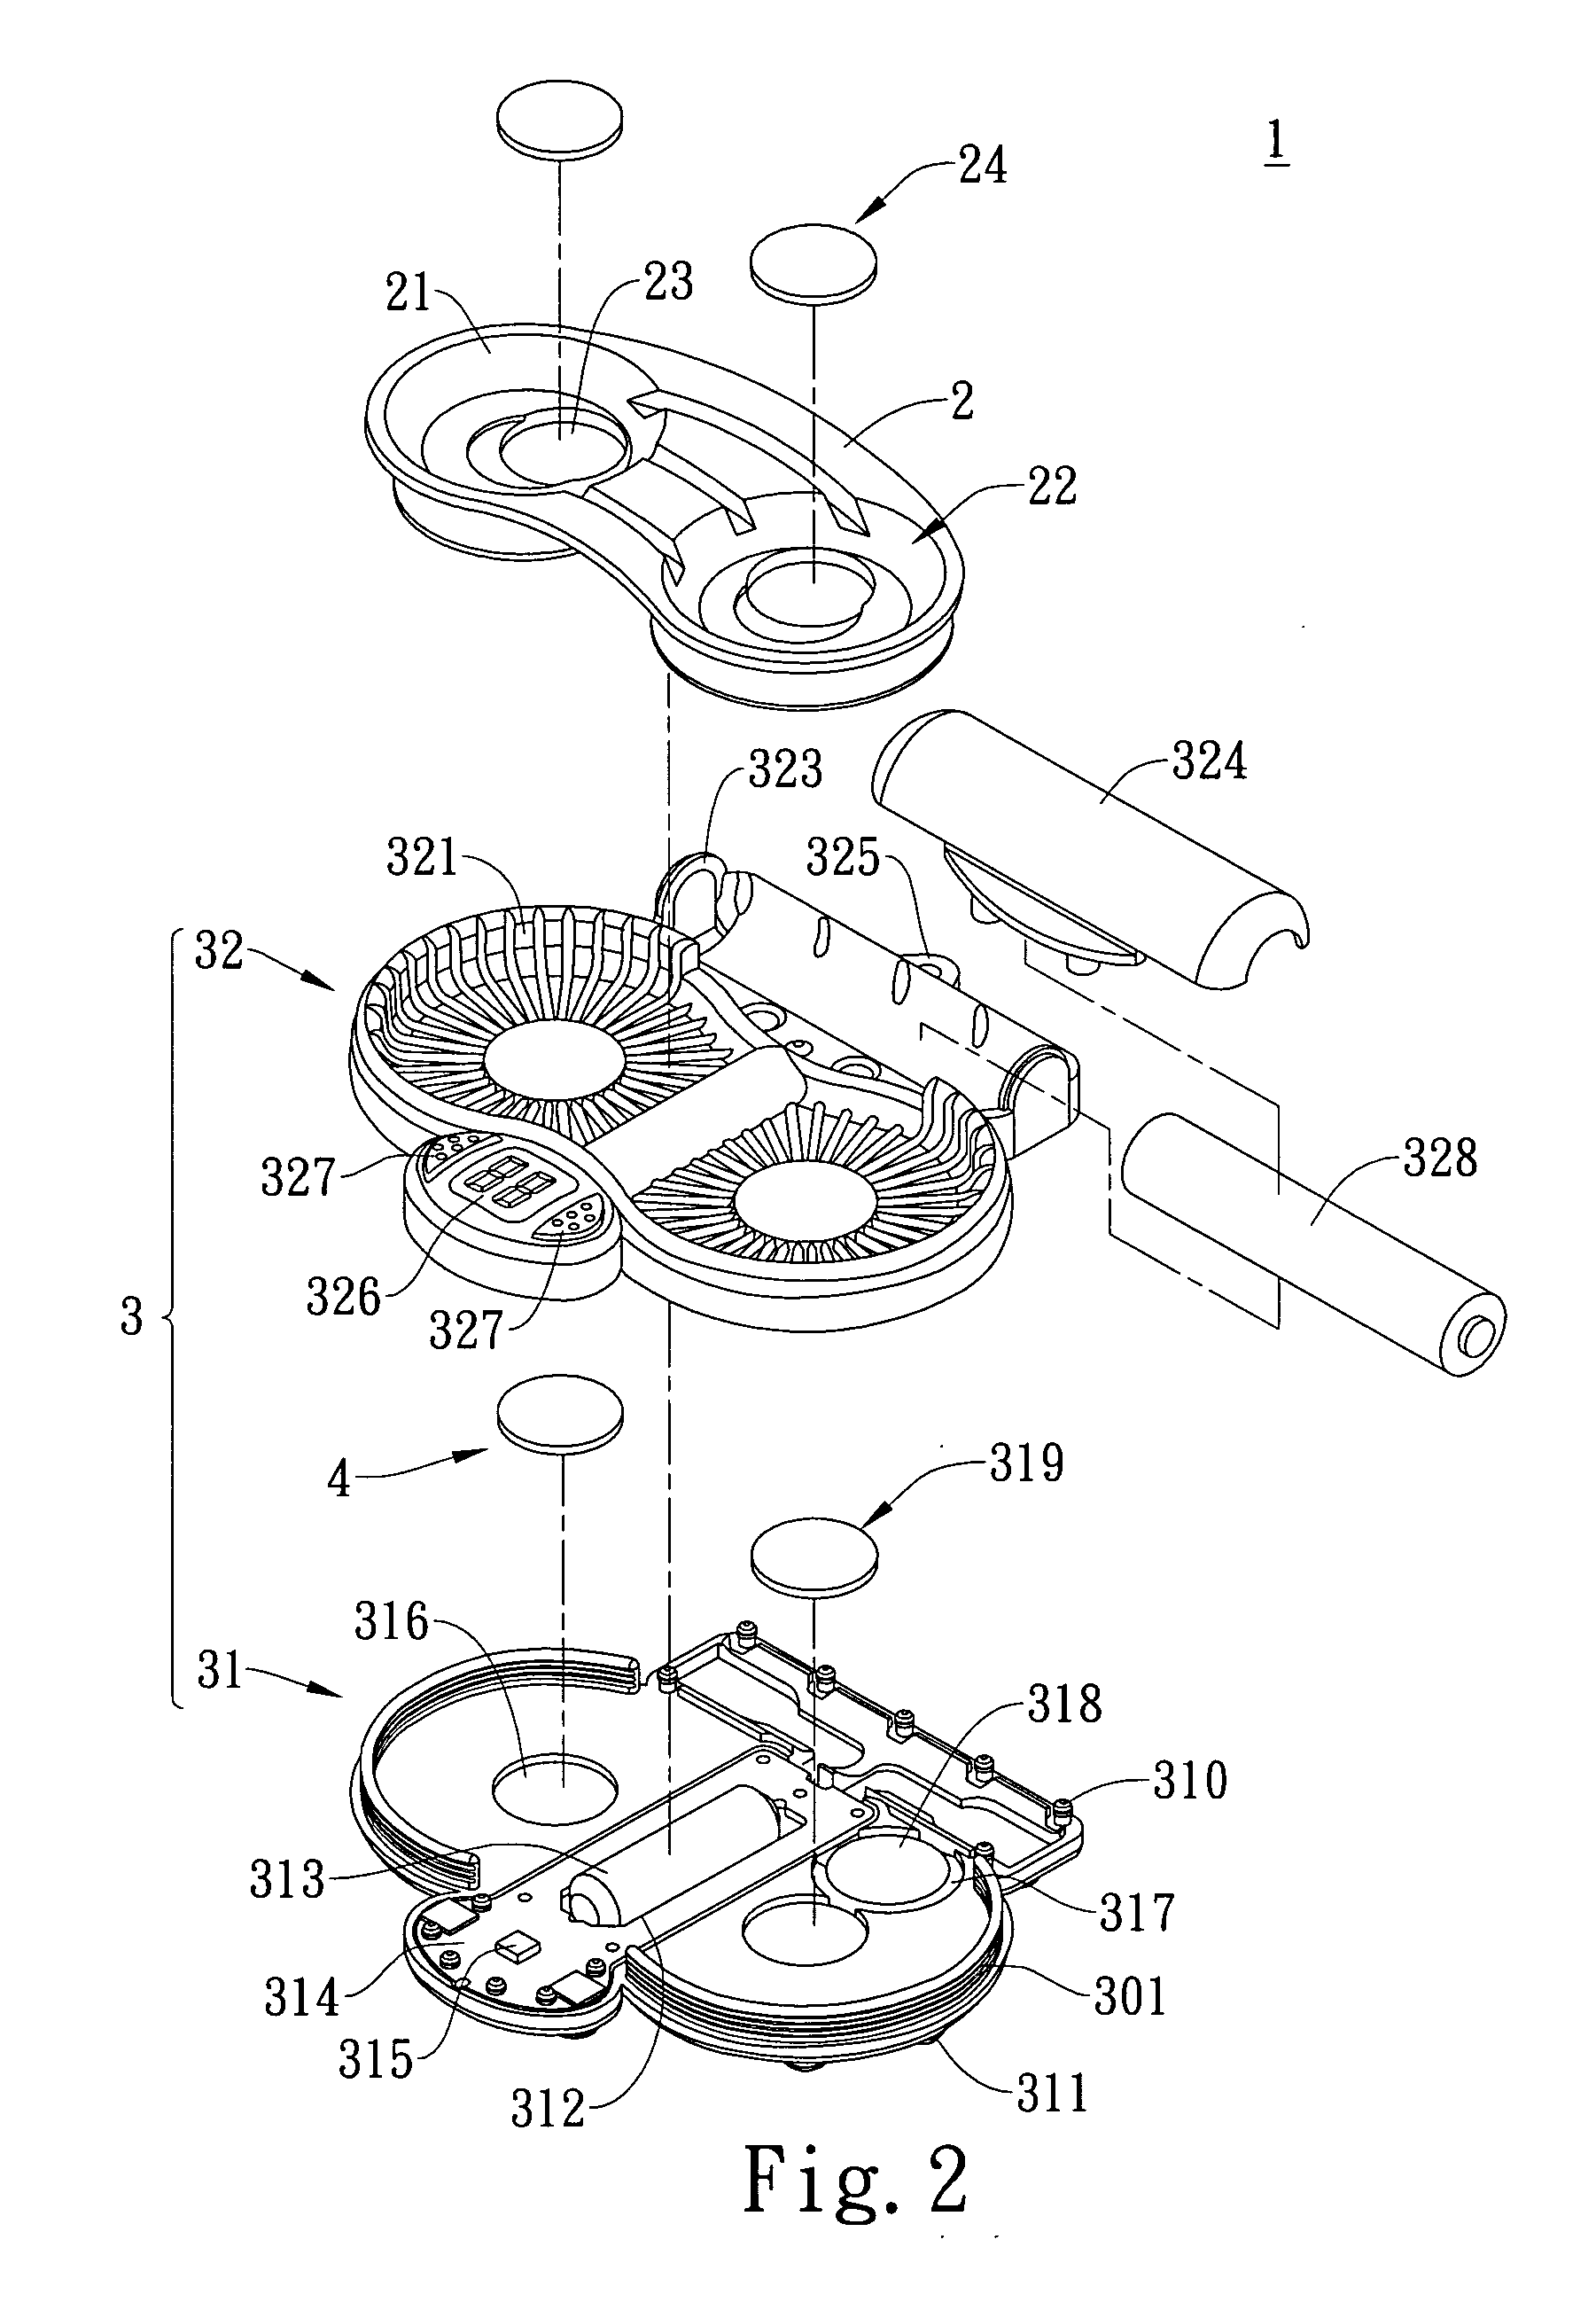 Vibration-type cleaning device for contact lenses